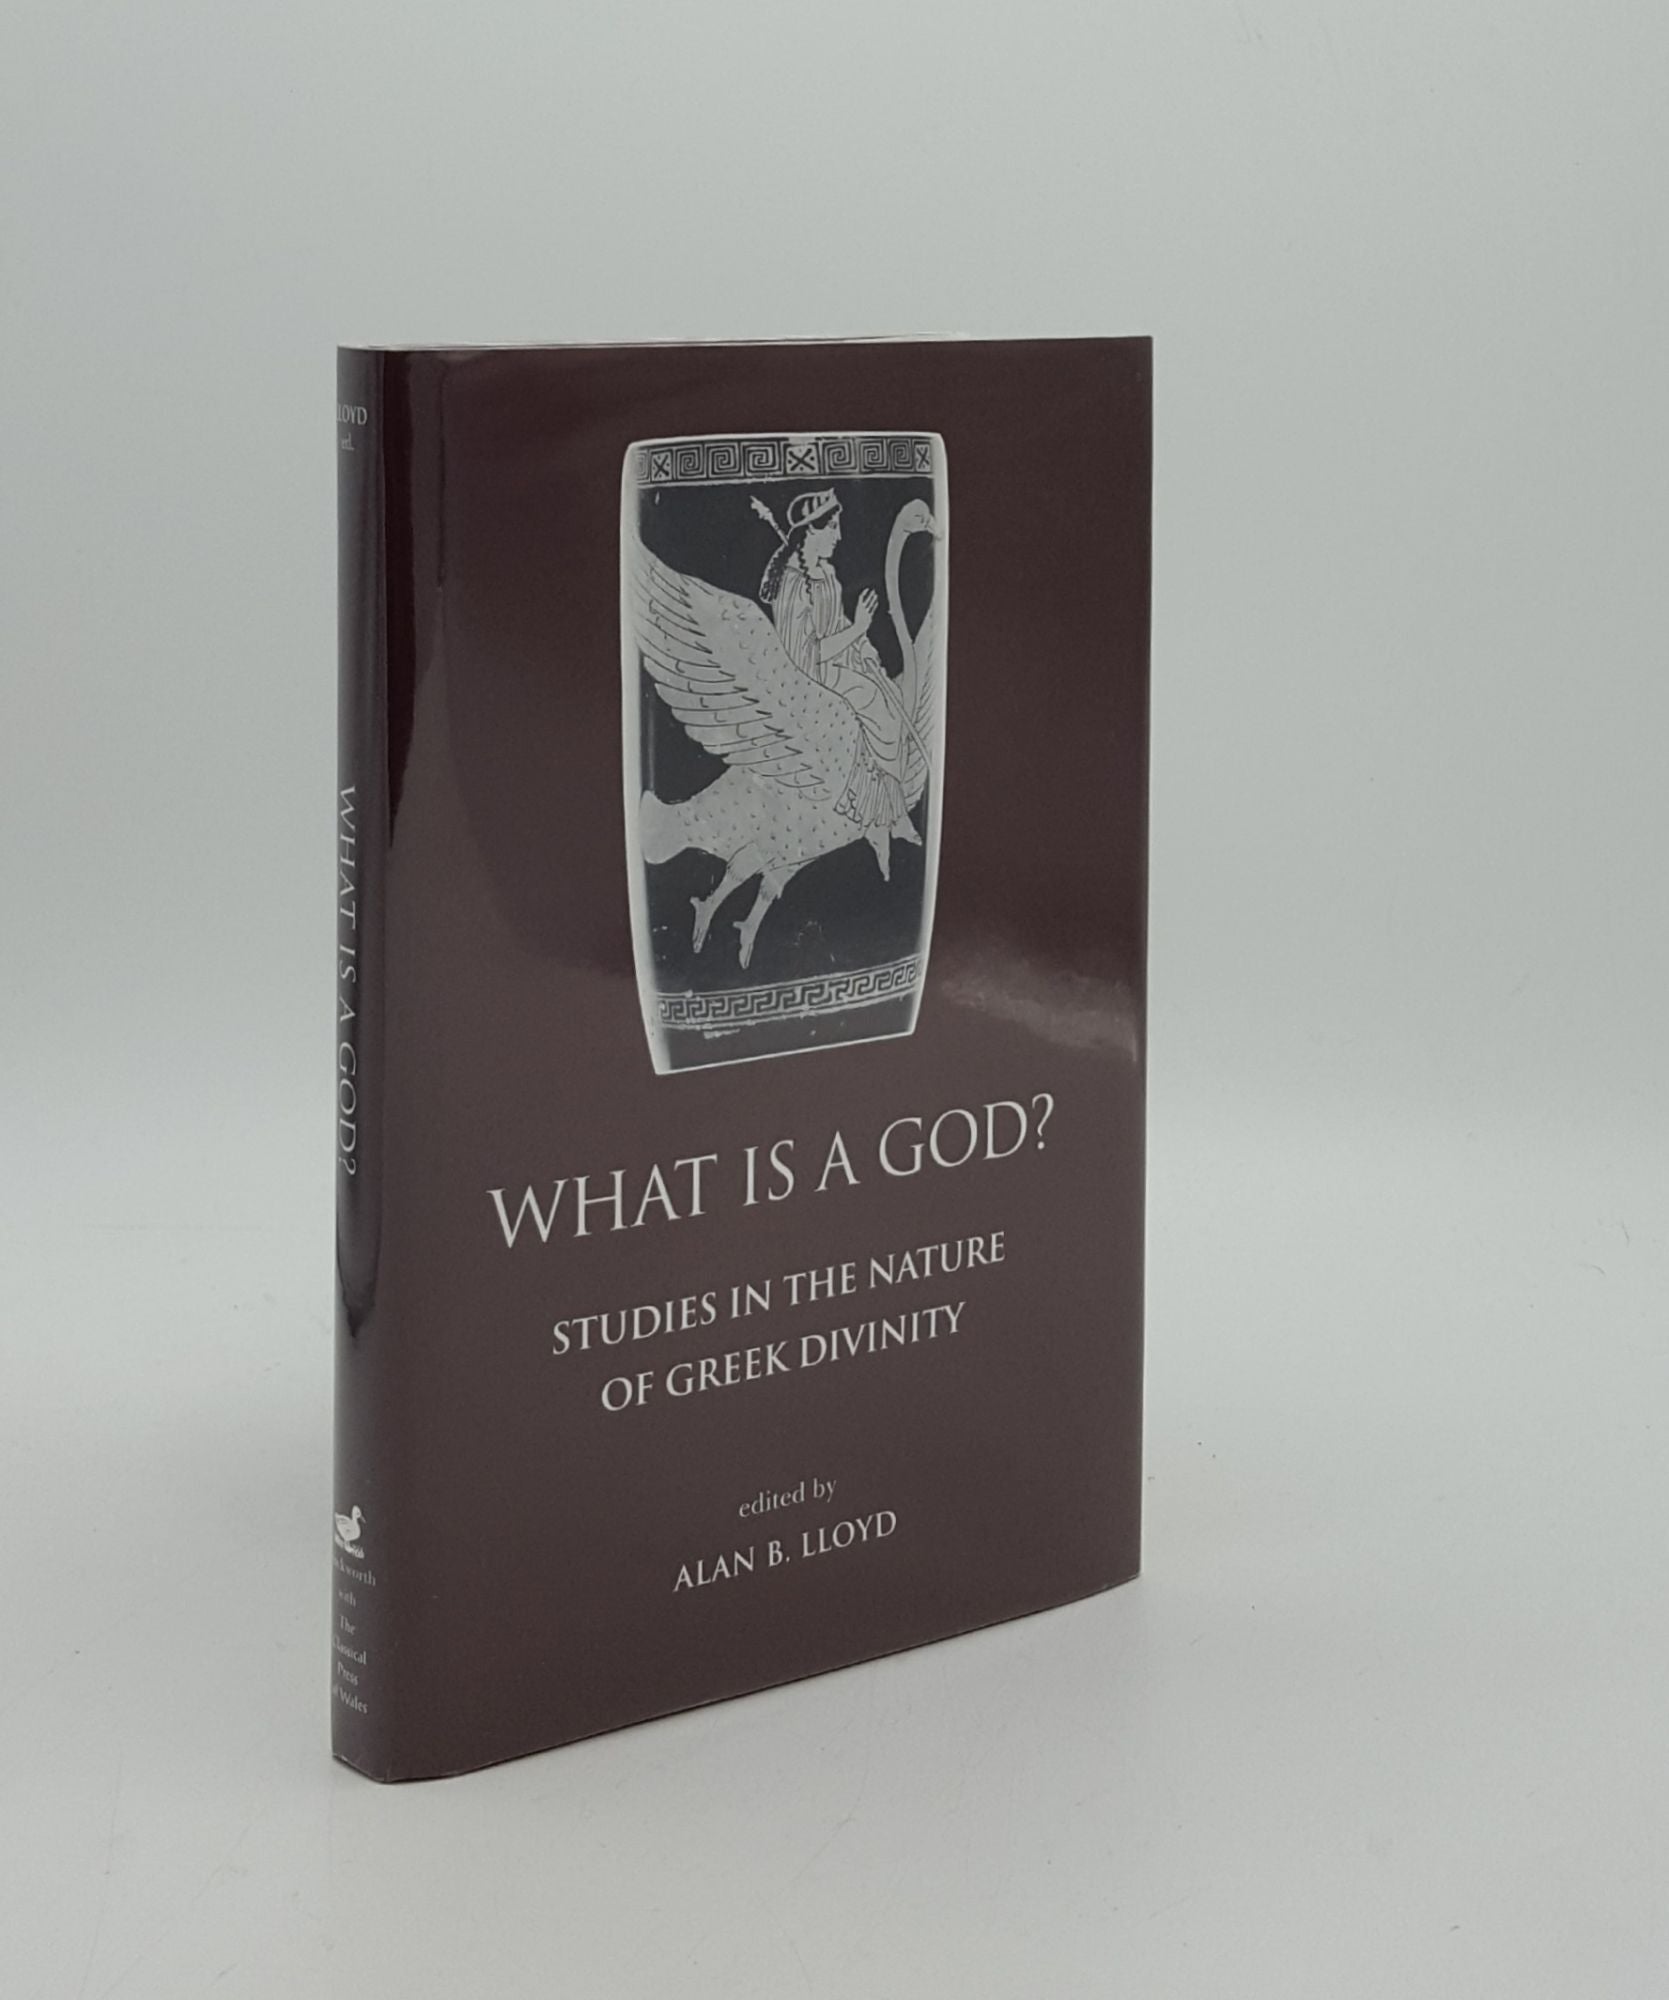 LLOYD Alan B. - What Is a God? Studies in the Nature of Greek Divinity